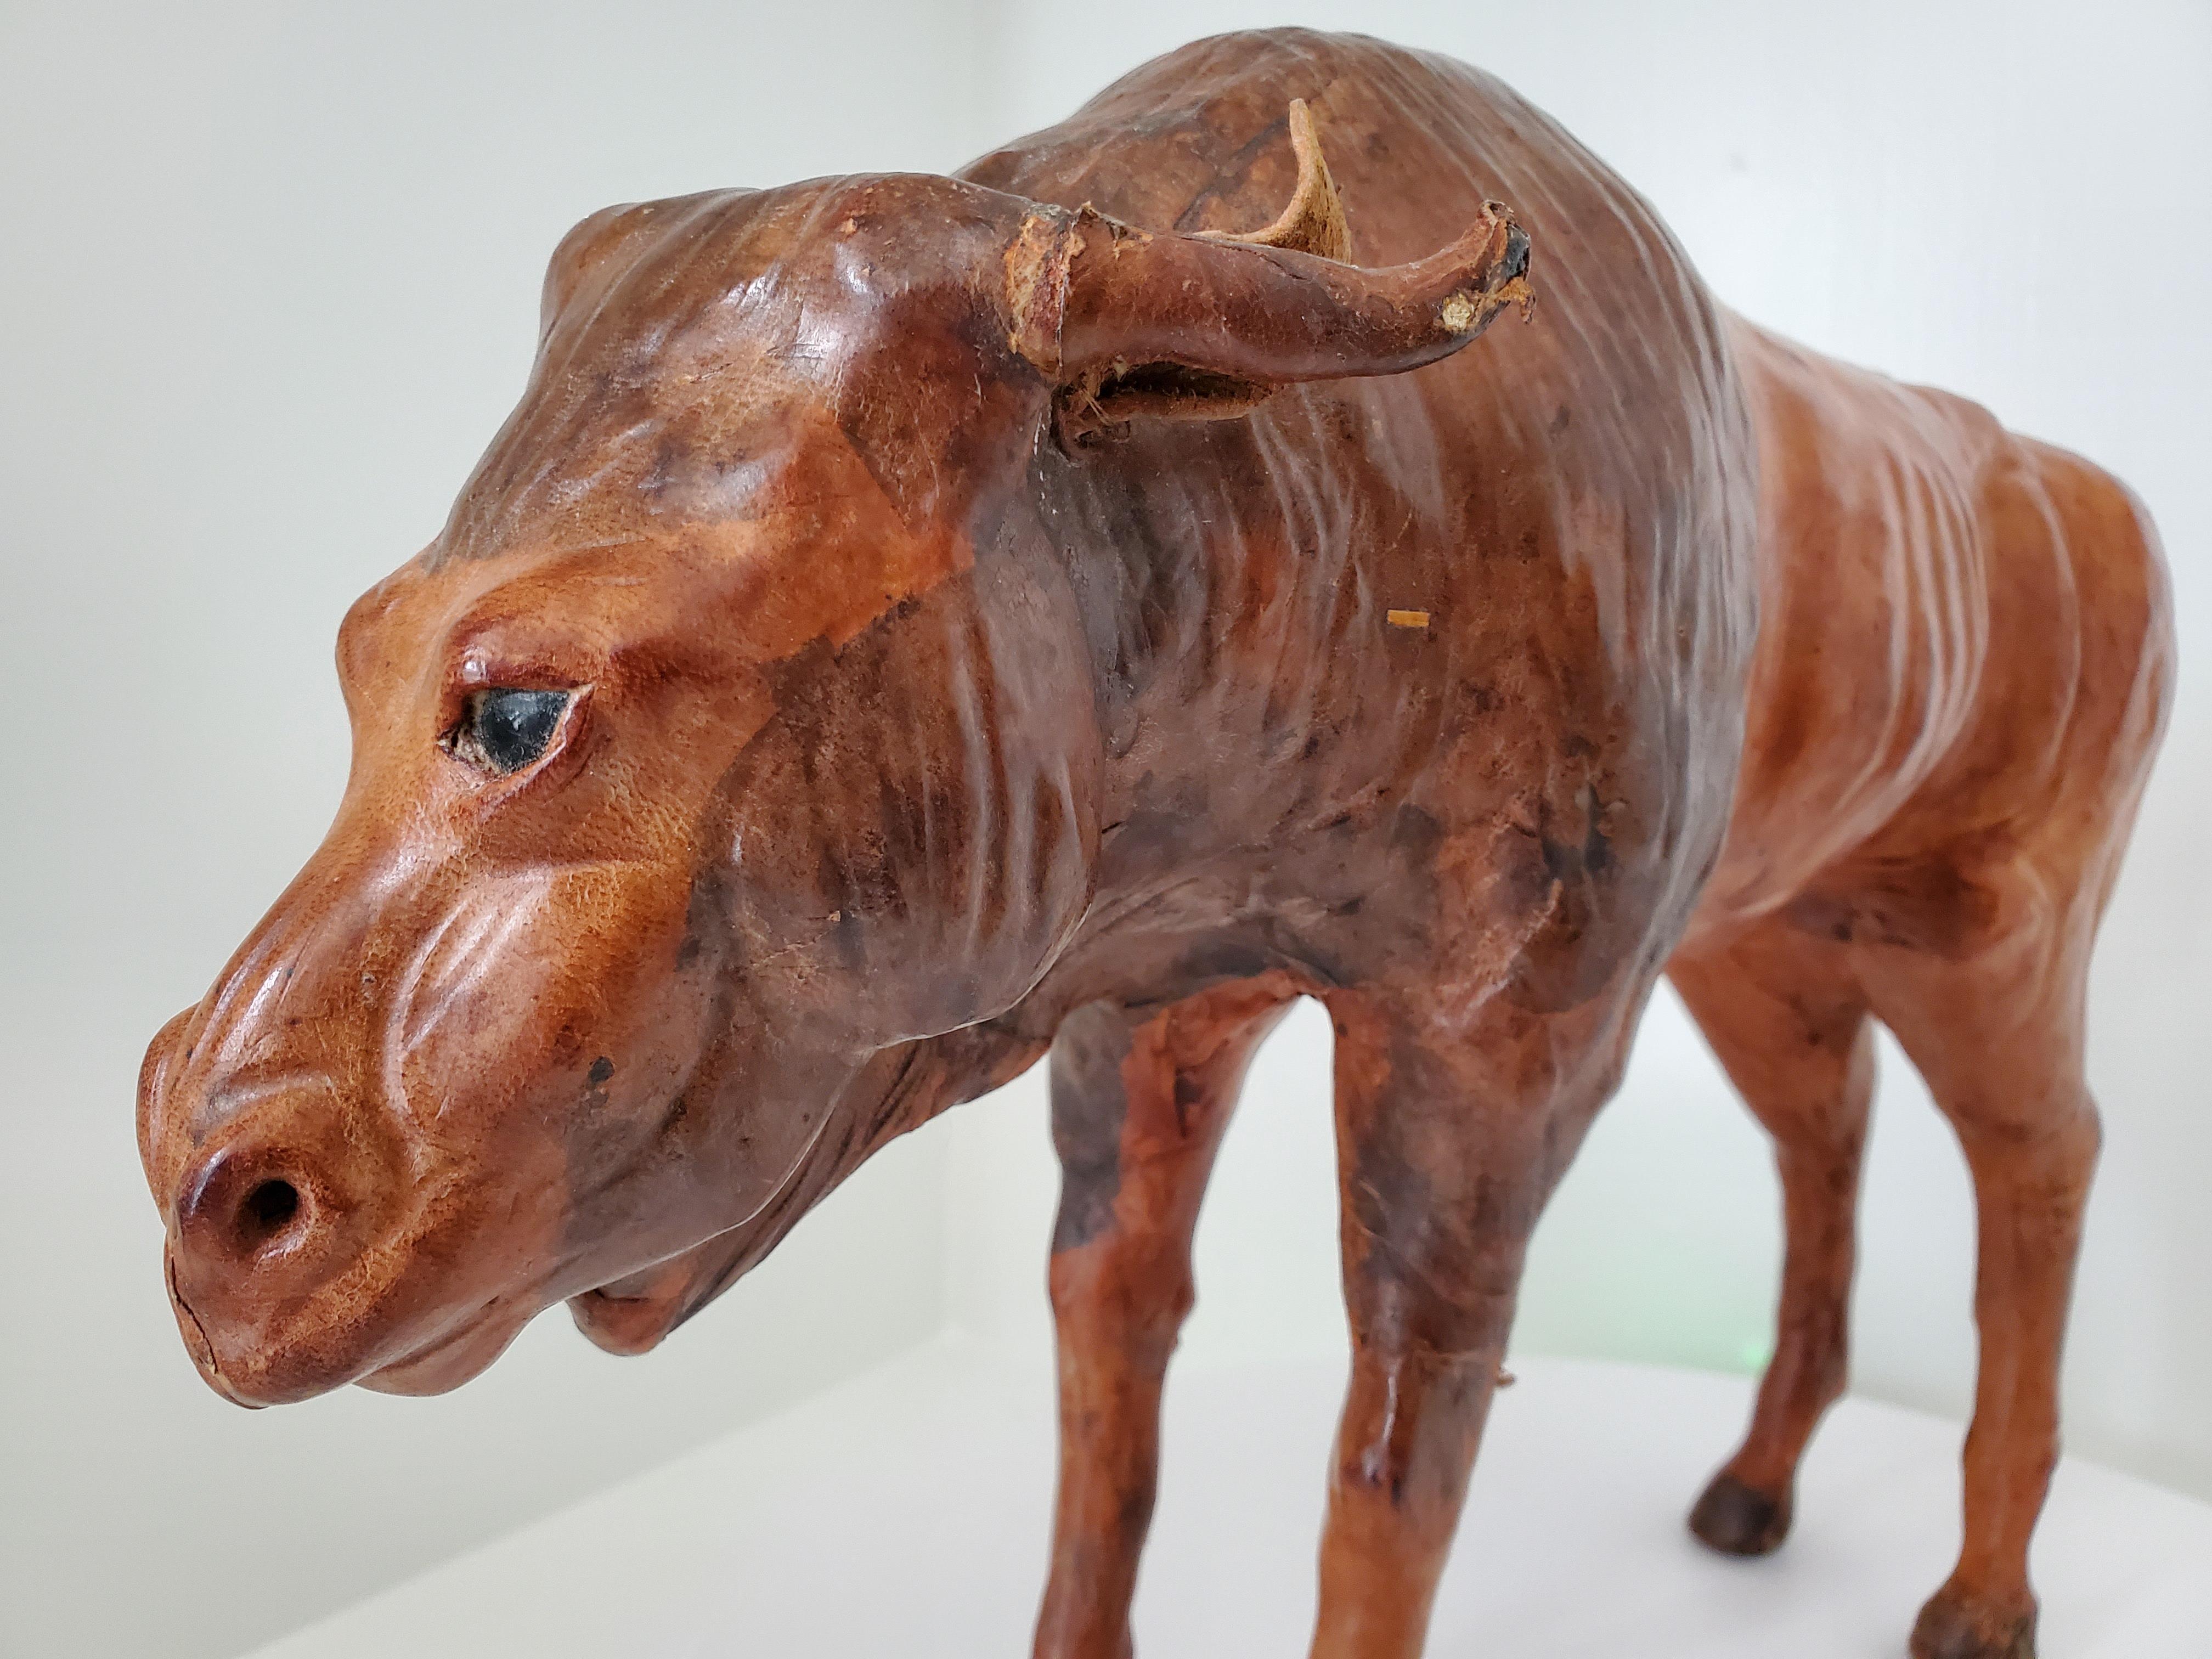 Woodwork Vintage Sculpture - Wood and Leather Wildebeest Likely from Liberty's London For Sale